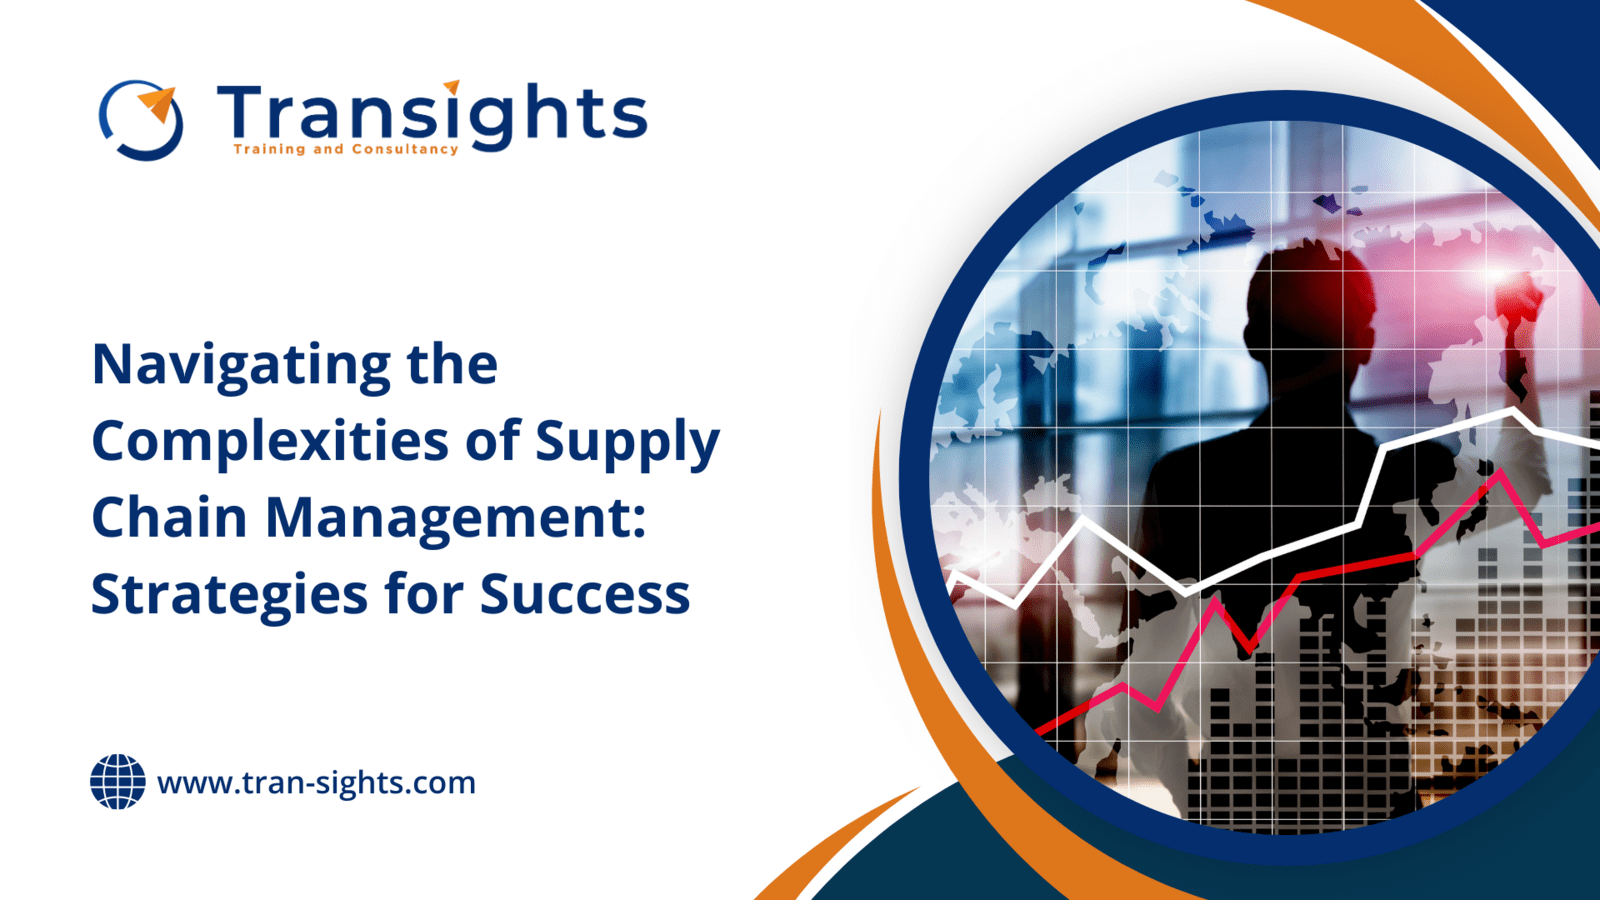 Navigating the Complexities of Supply Chain Management: Strategies for Success